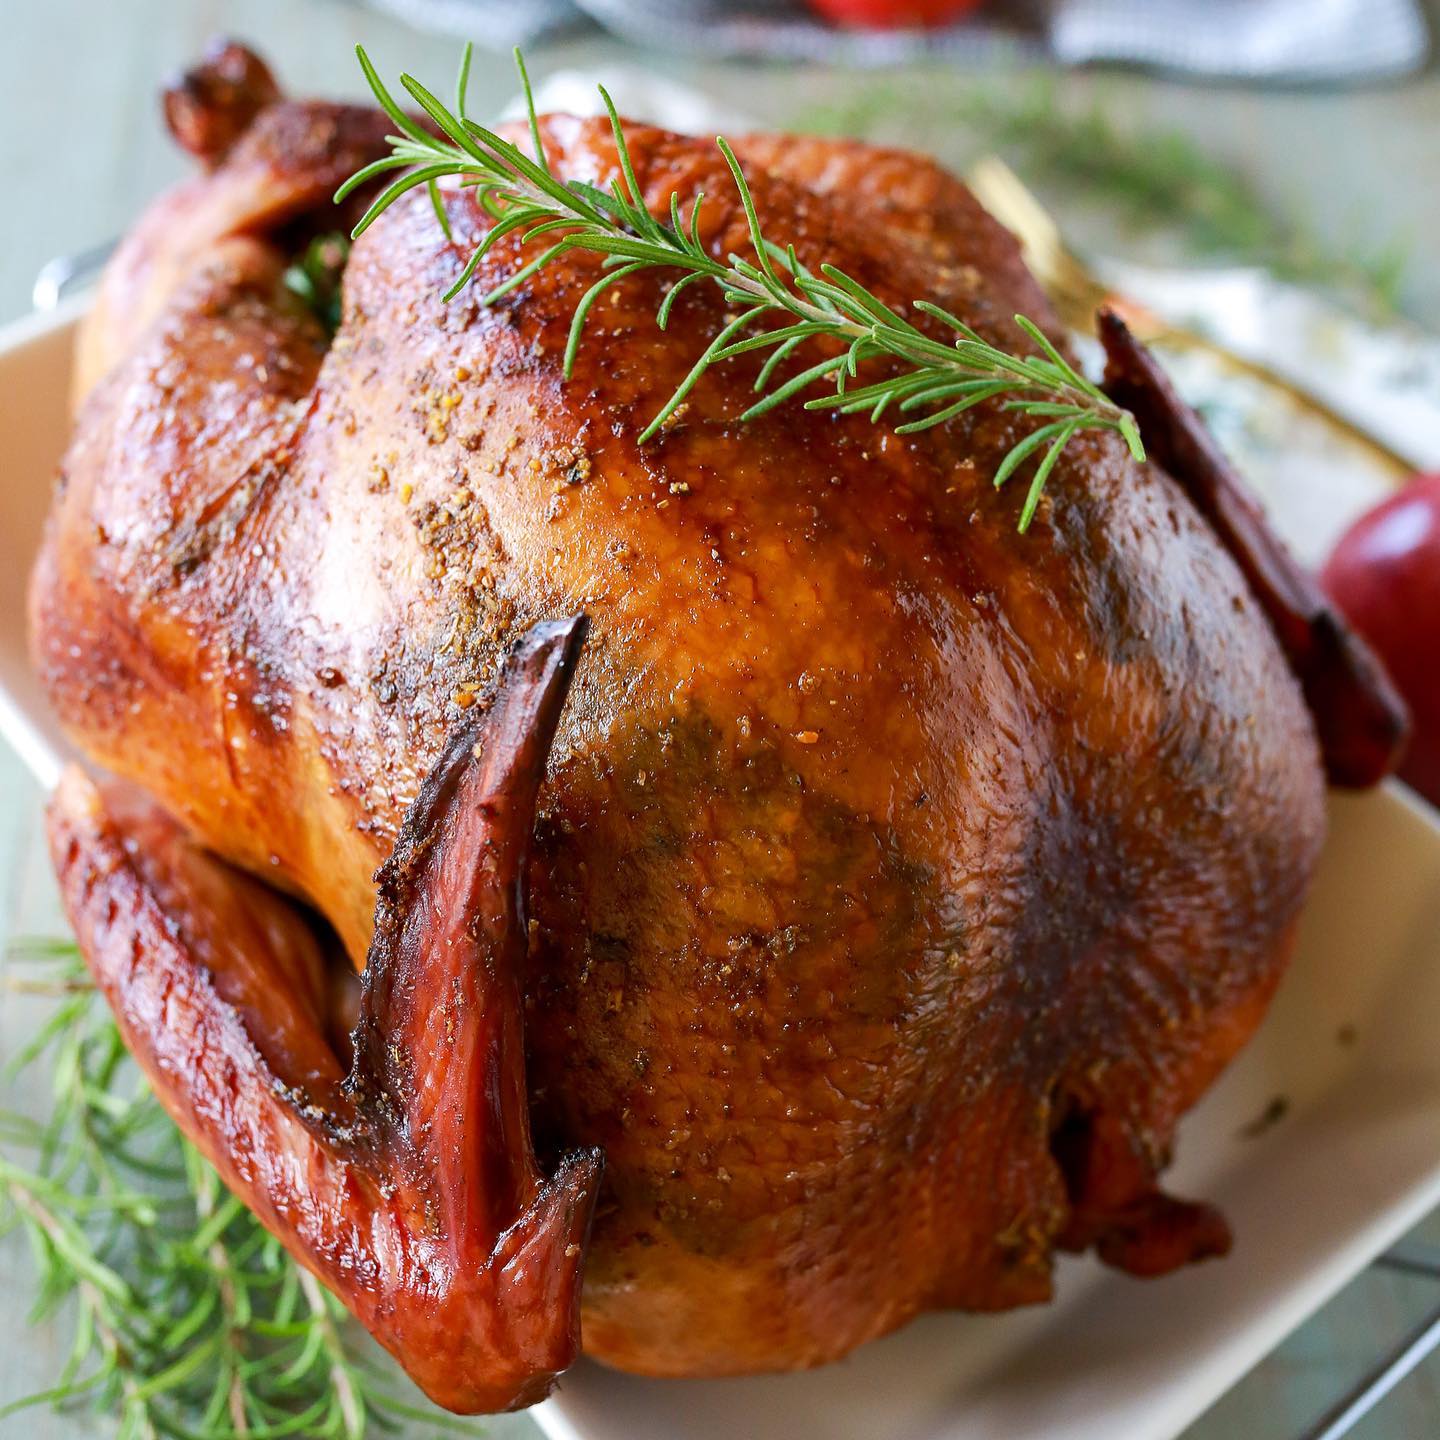 124810205 10158814844749817 6273530310035549650 o 5 places to get the perfect local turkey for Thanksgiving